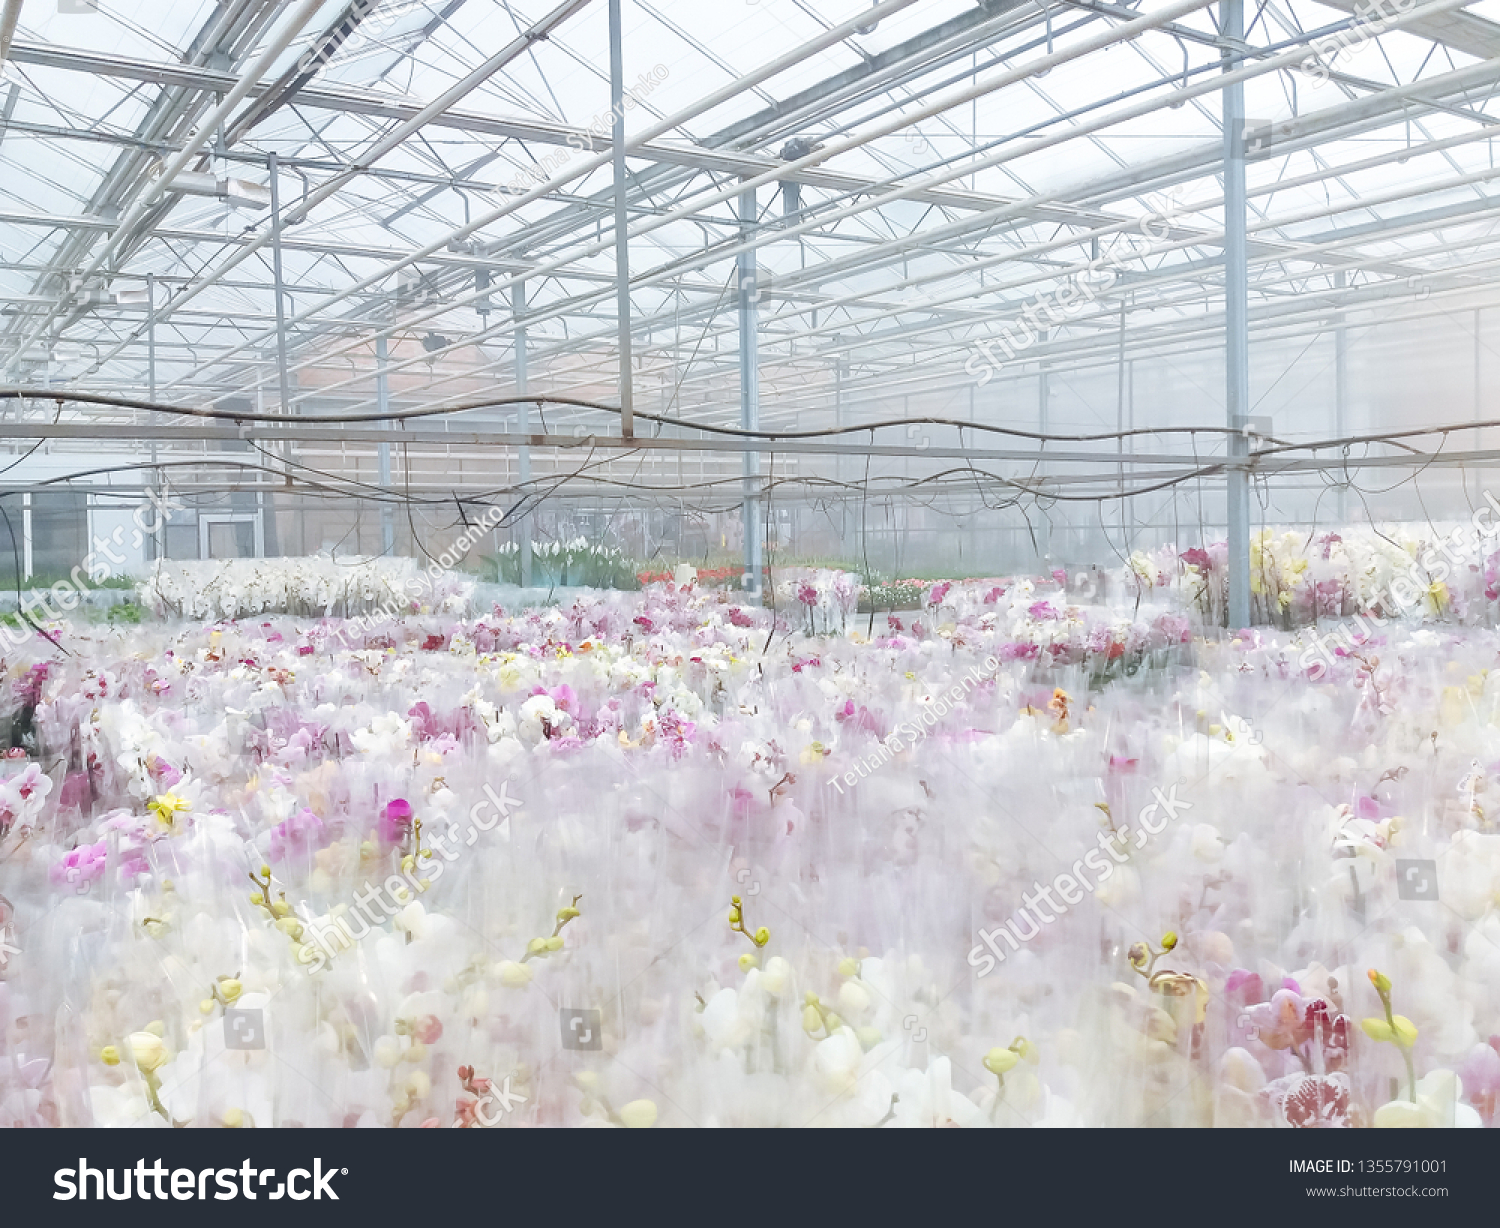 Cultivated ornamental flowers growing in a commercial plactic foil covered horticulture greenhouse #1355791001